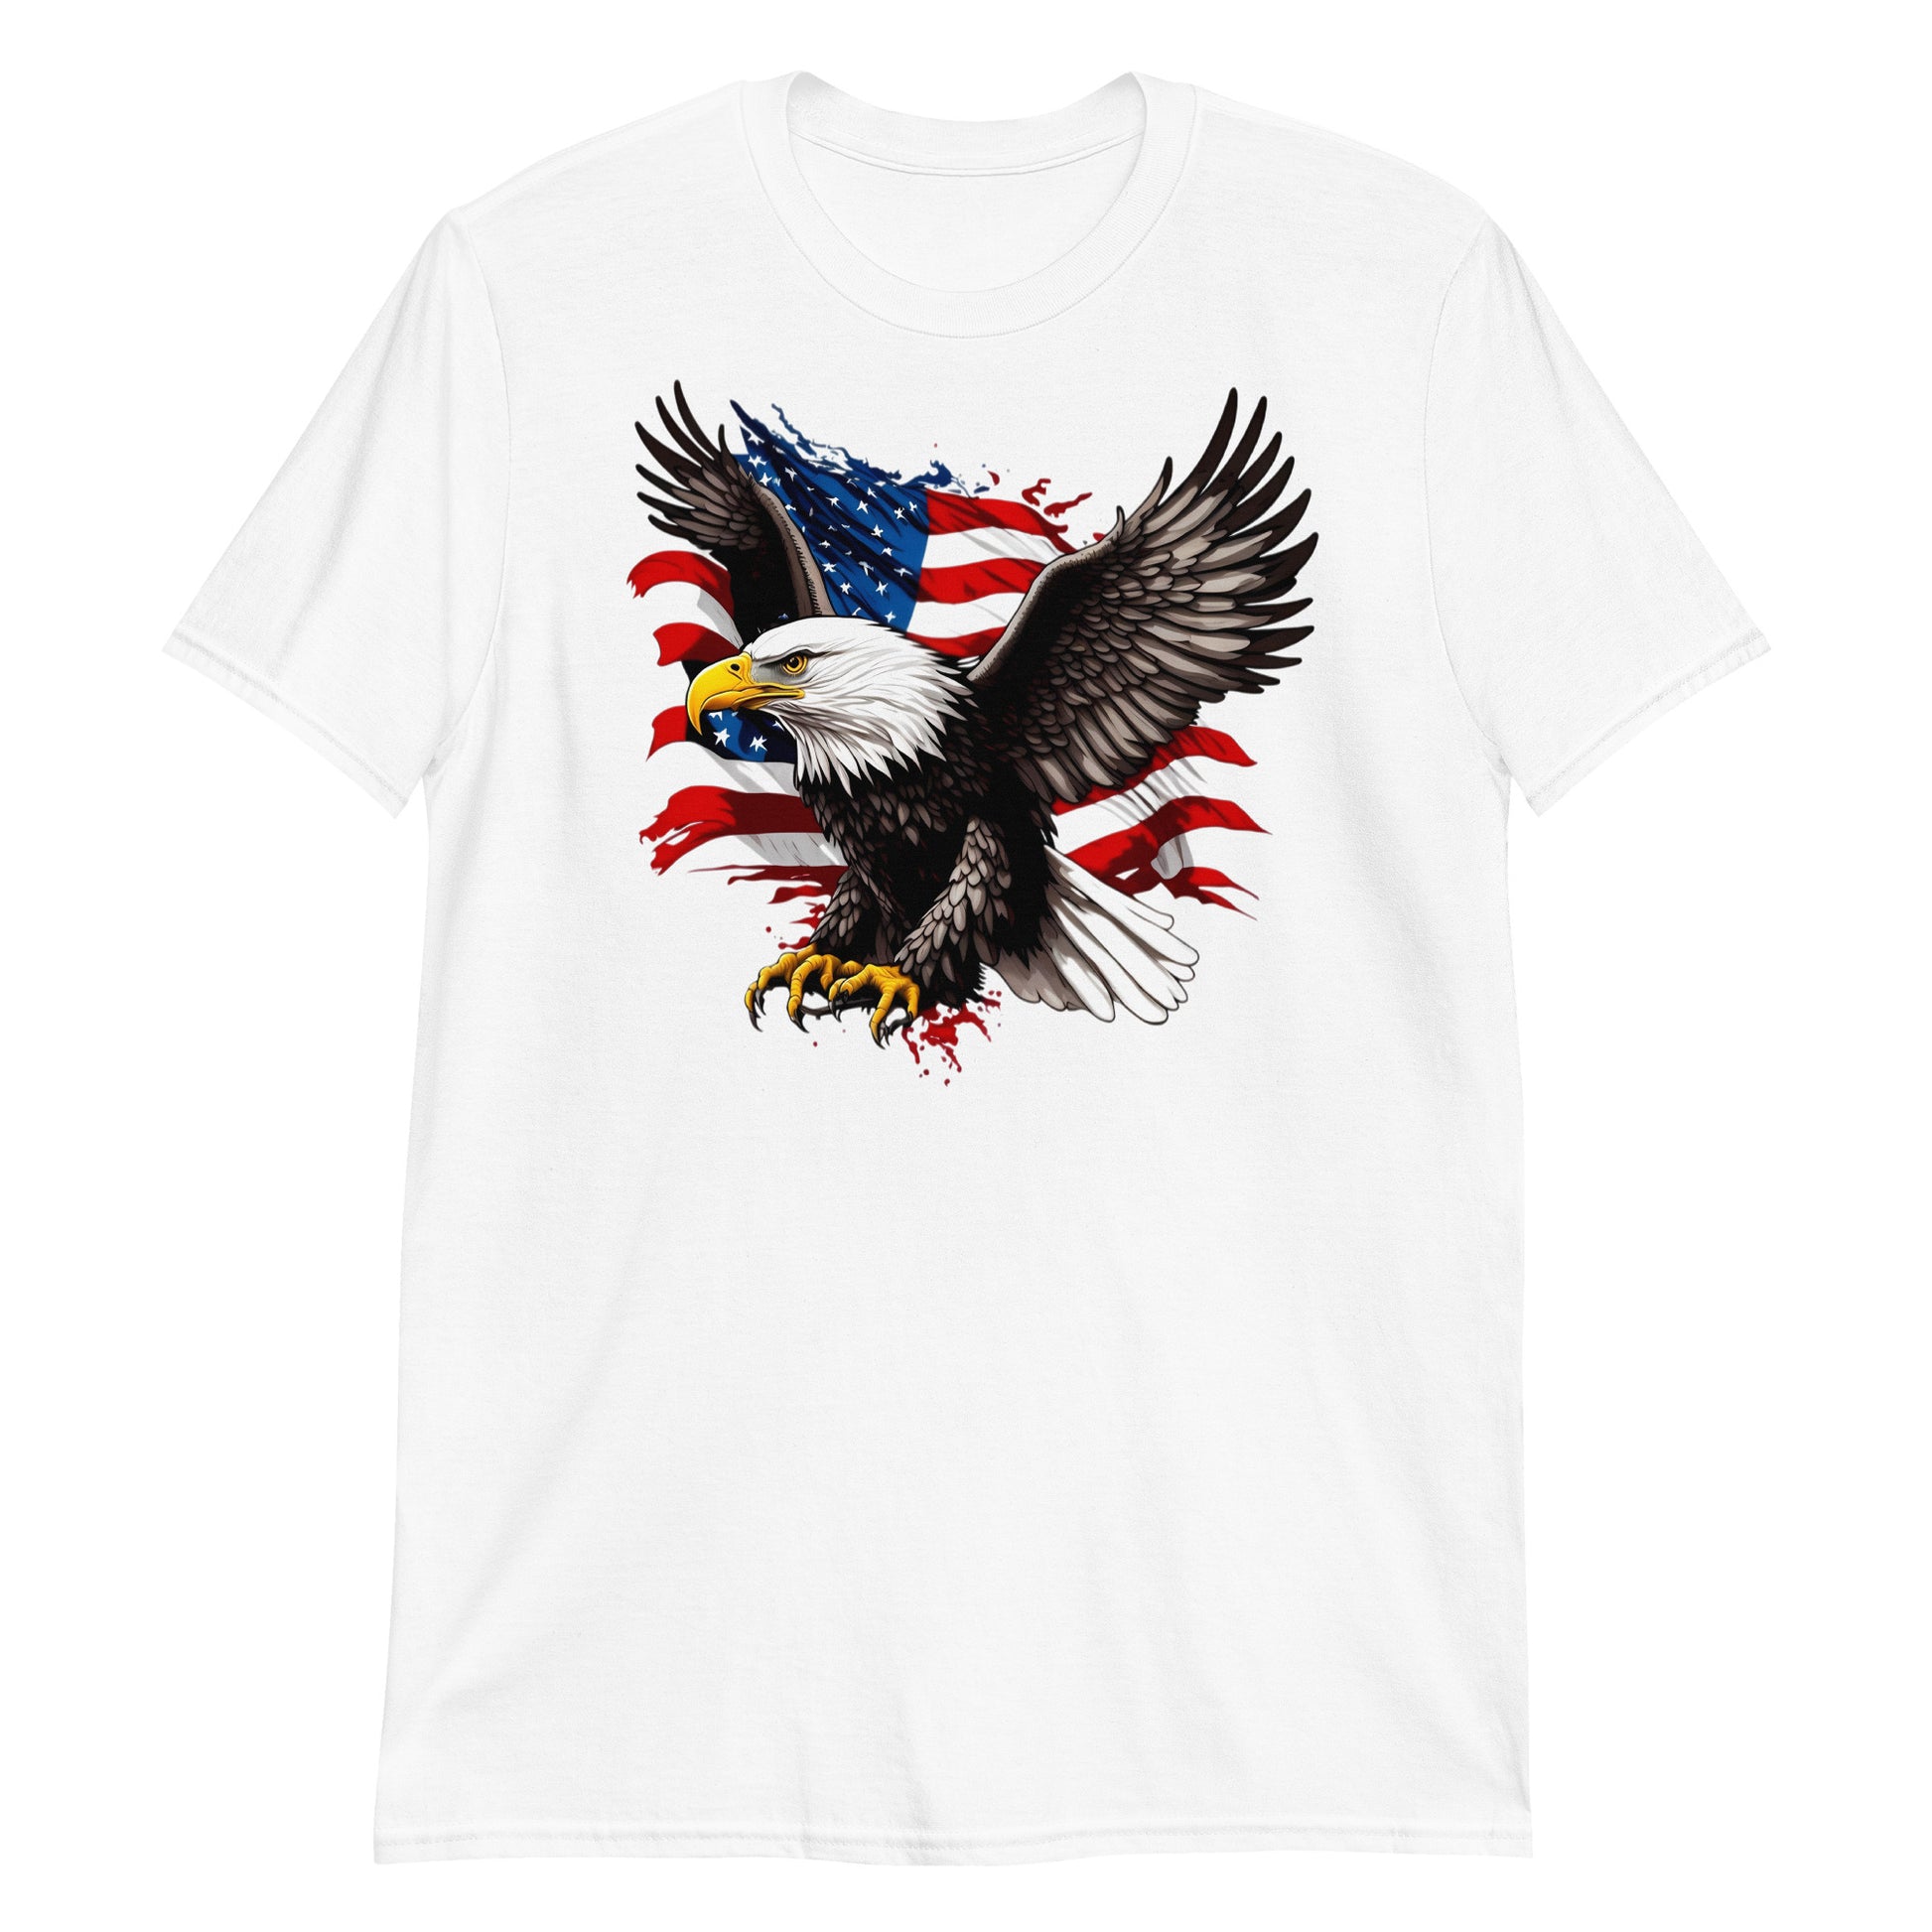 White Eagle T Shirt For American Patriots